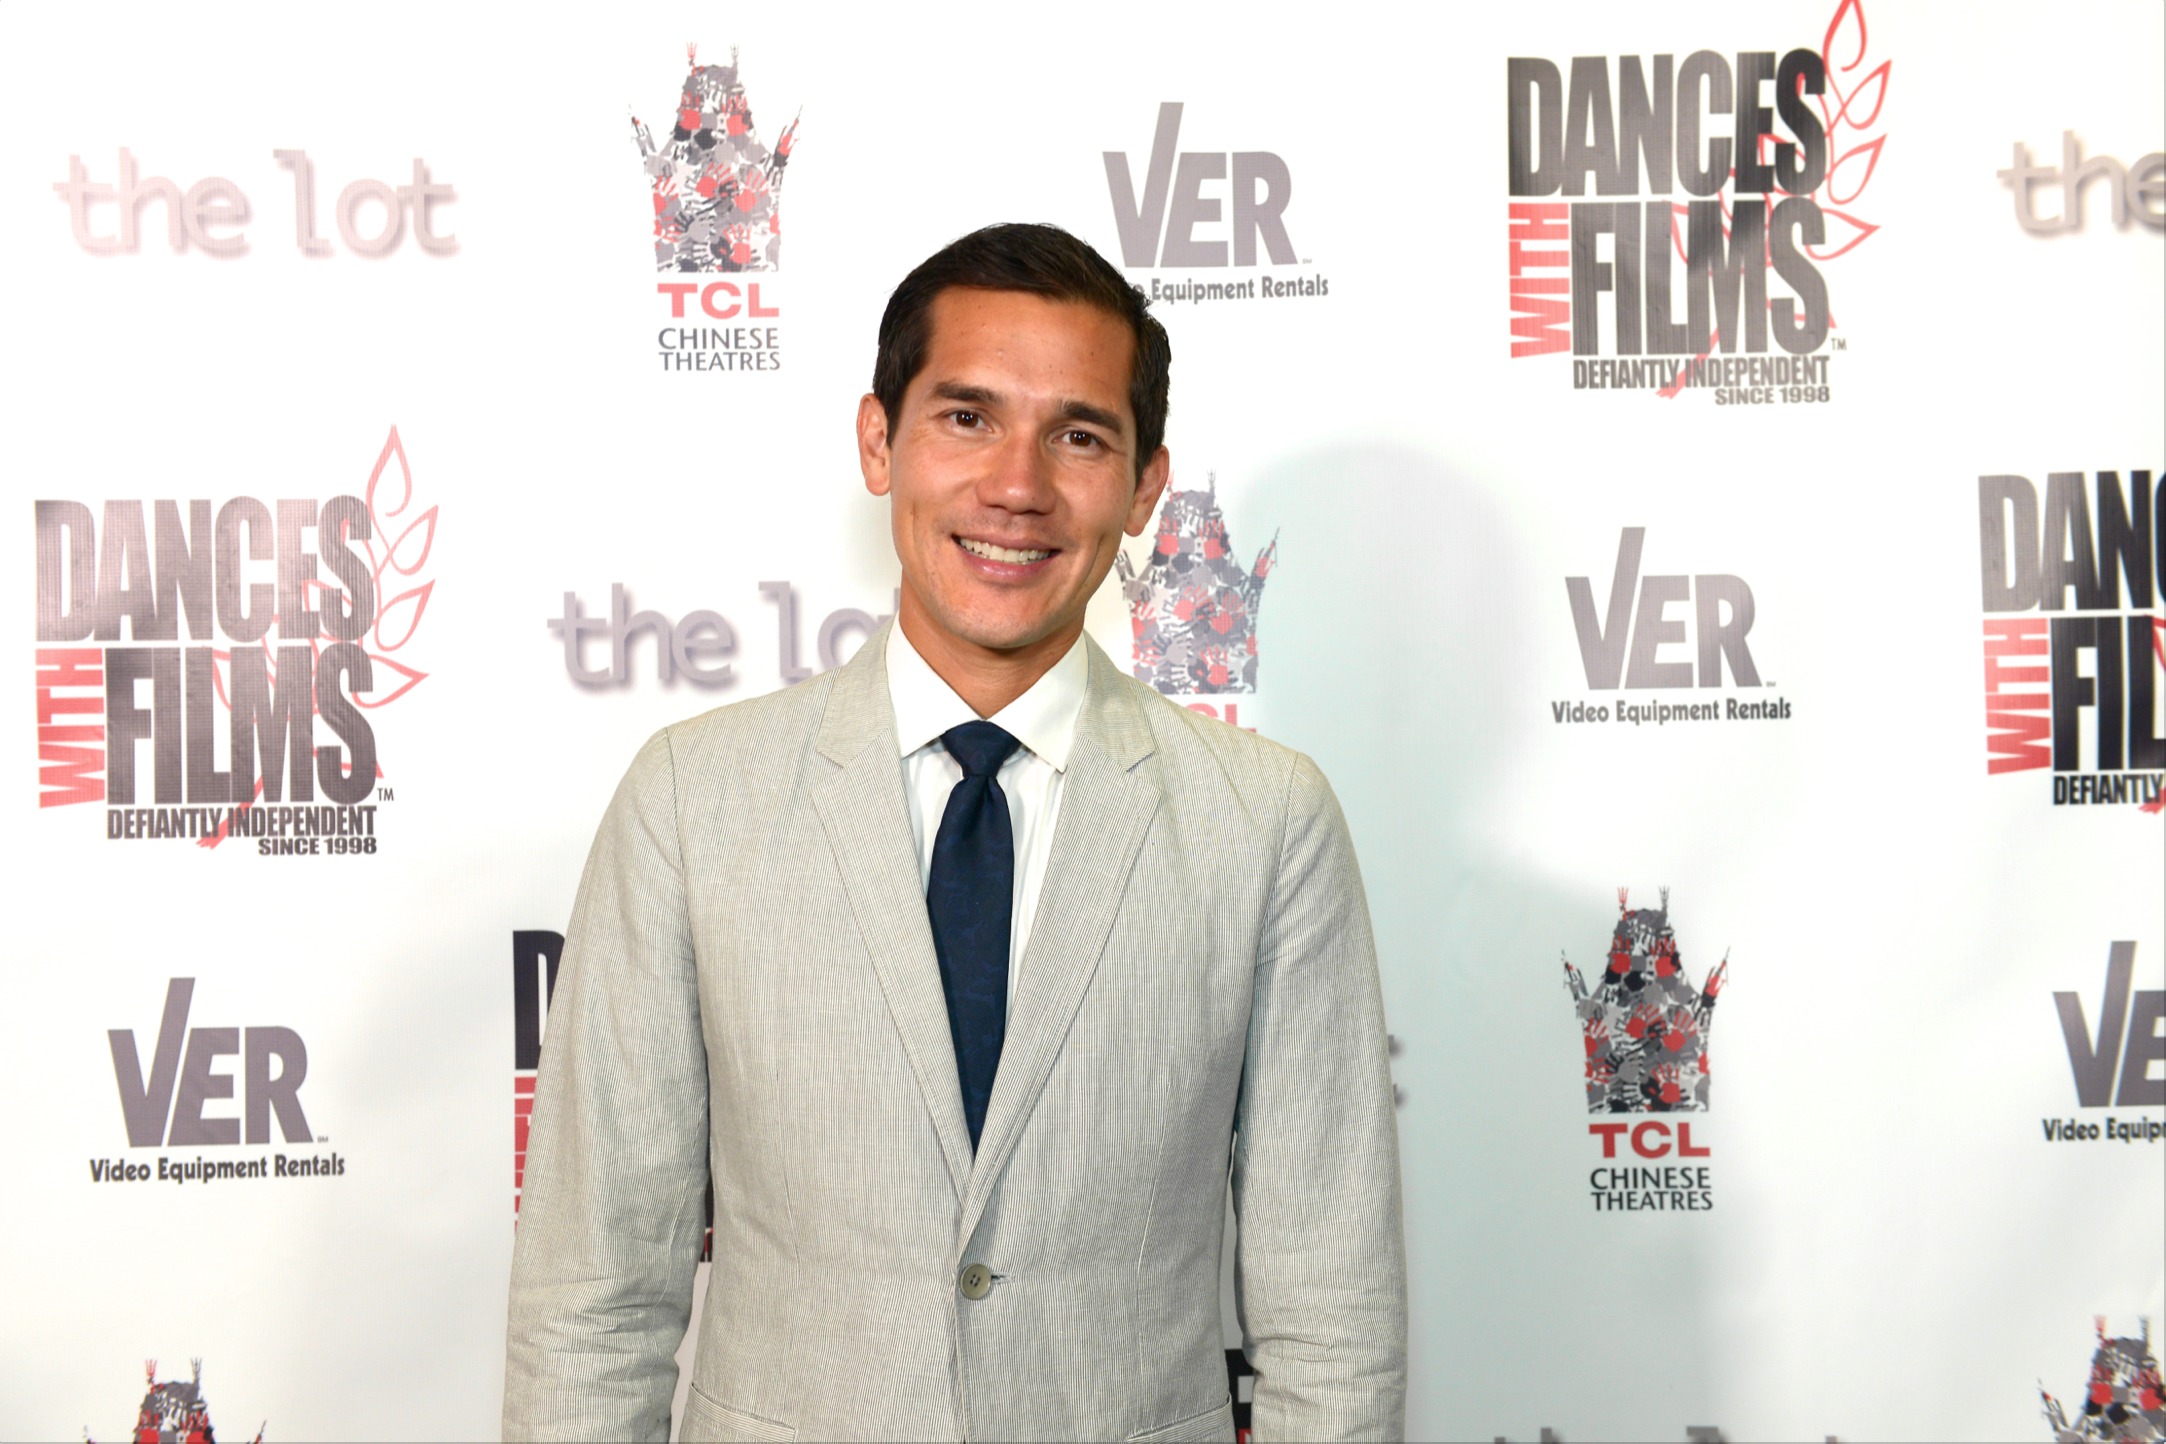 Scotty Crowe at Dances With Films for the premiere of 